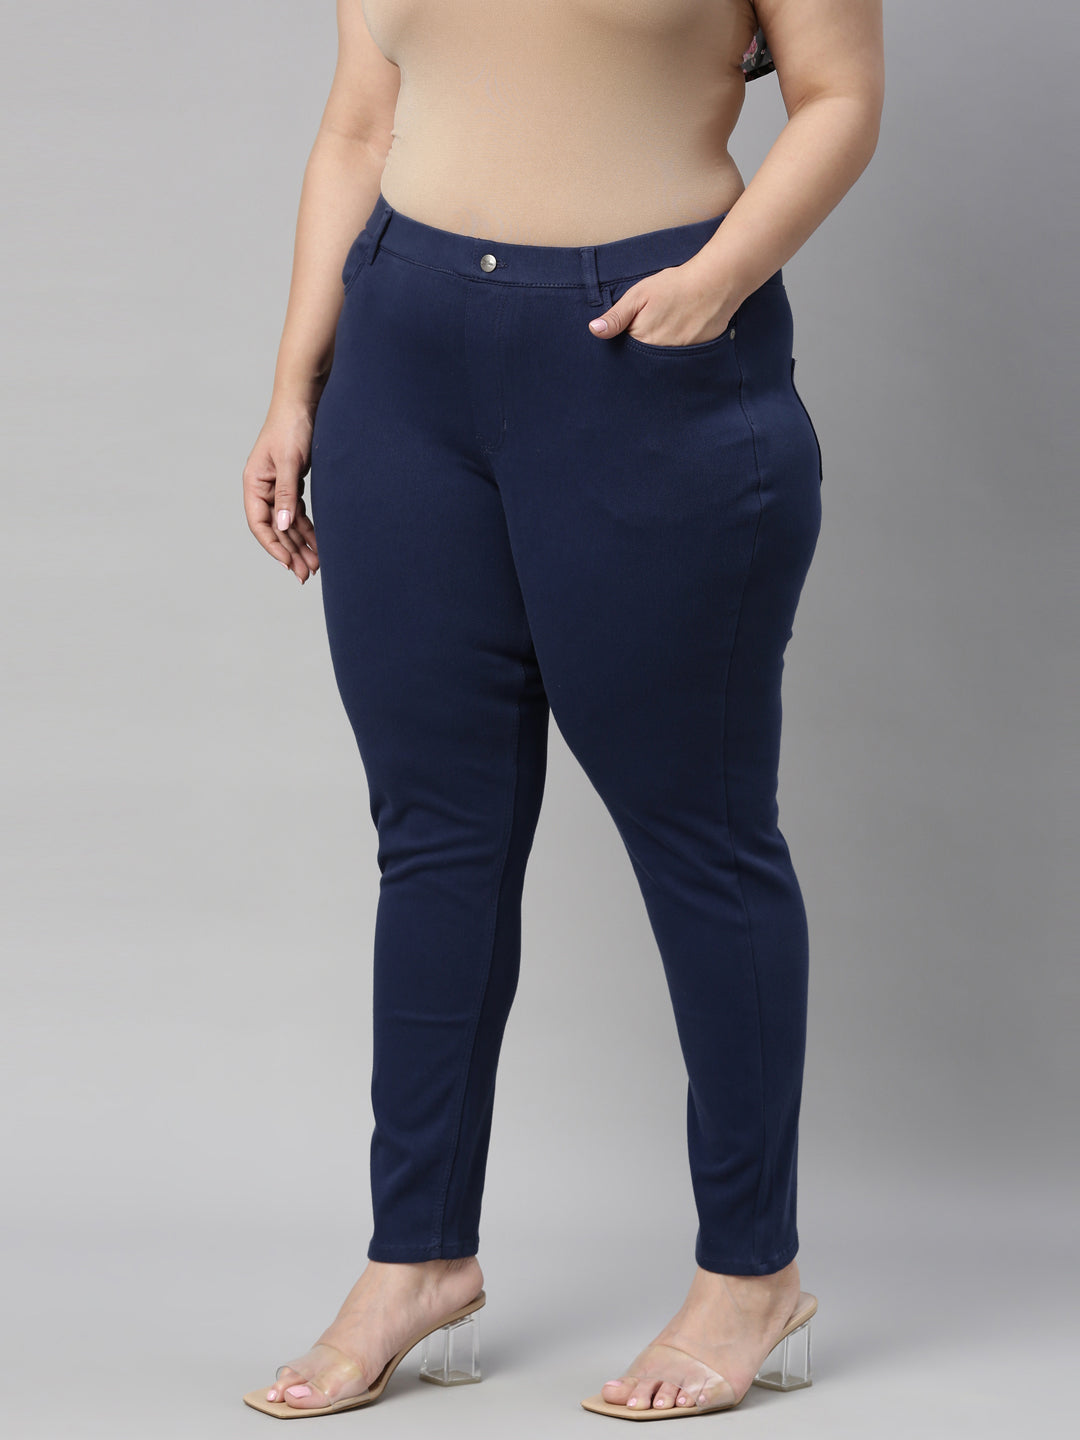 GO COLORS Jegging 360 Super Stretch Denim Premium 2XL (Blue Denim) in  Ghaziabad at best price by Arti Collection - Justdial